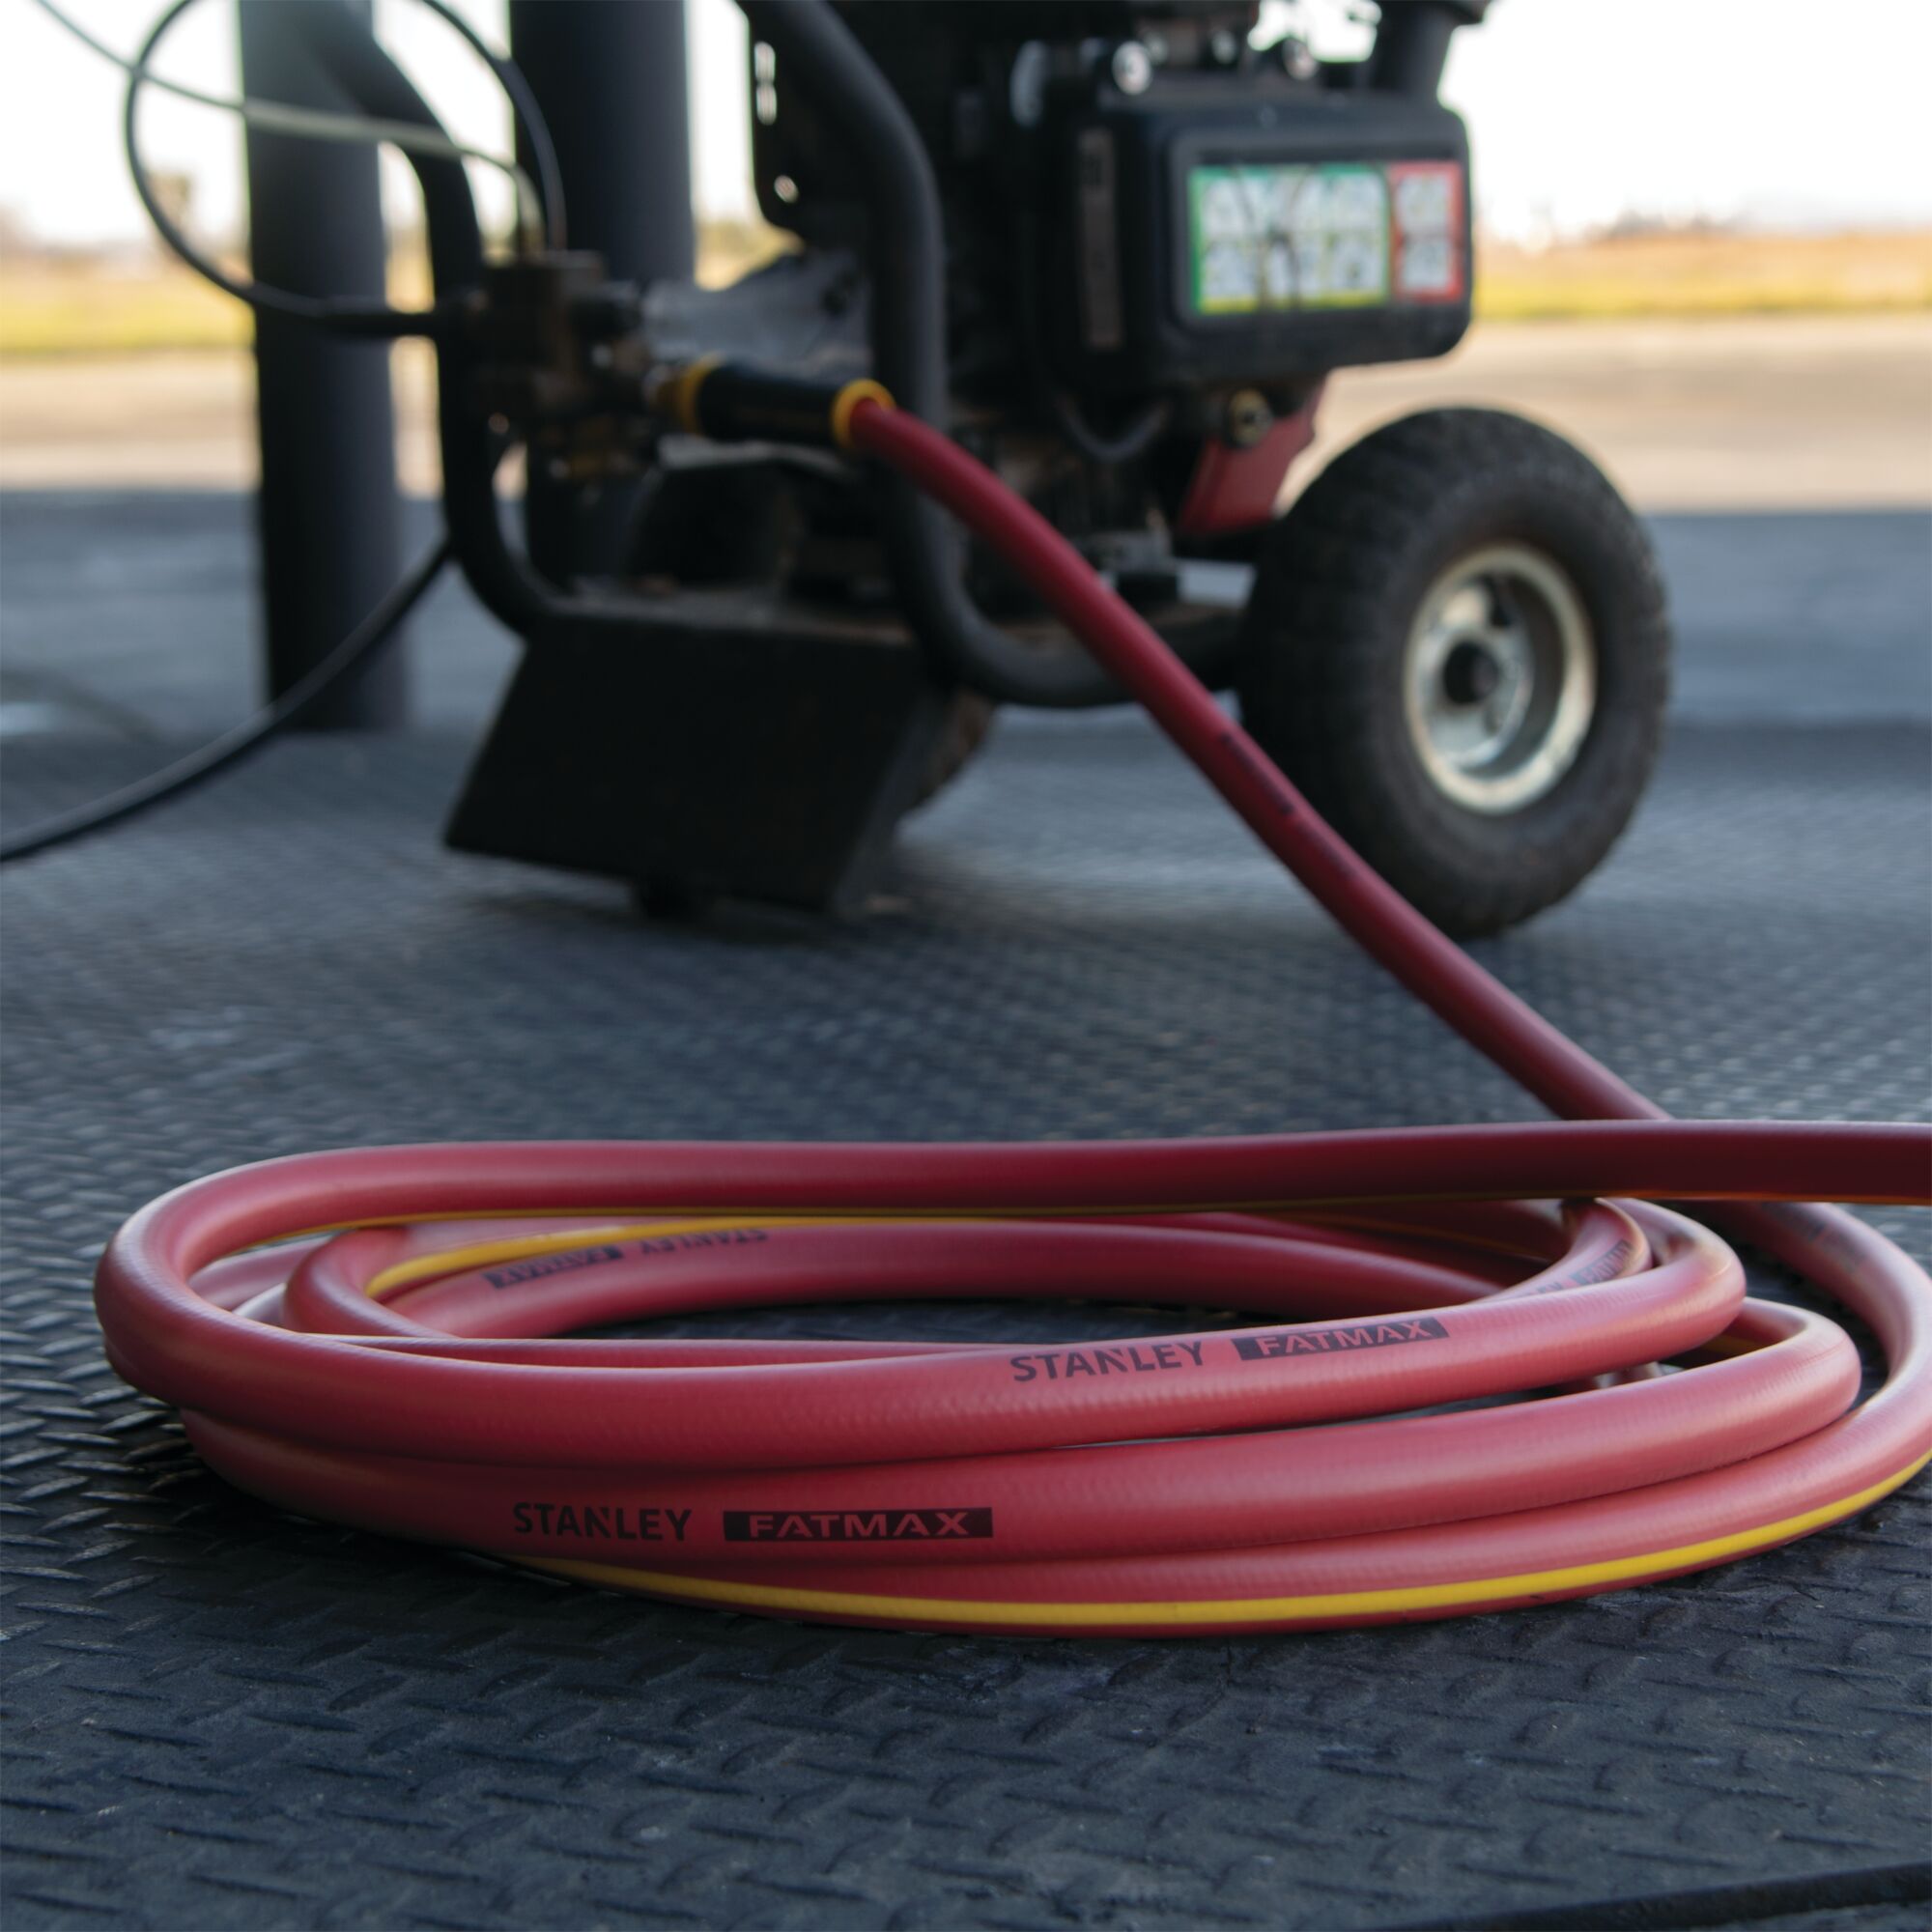 Fatmax polyfusion hot water hose in packaging placed in workplace.